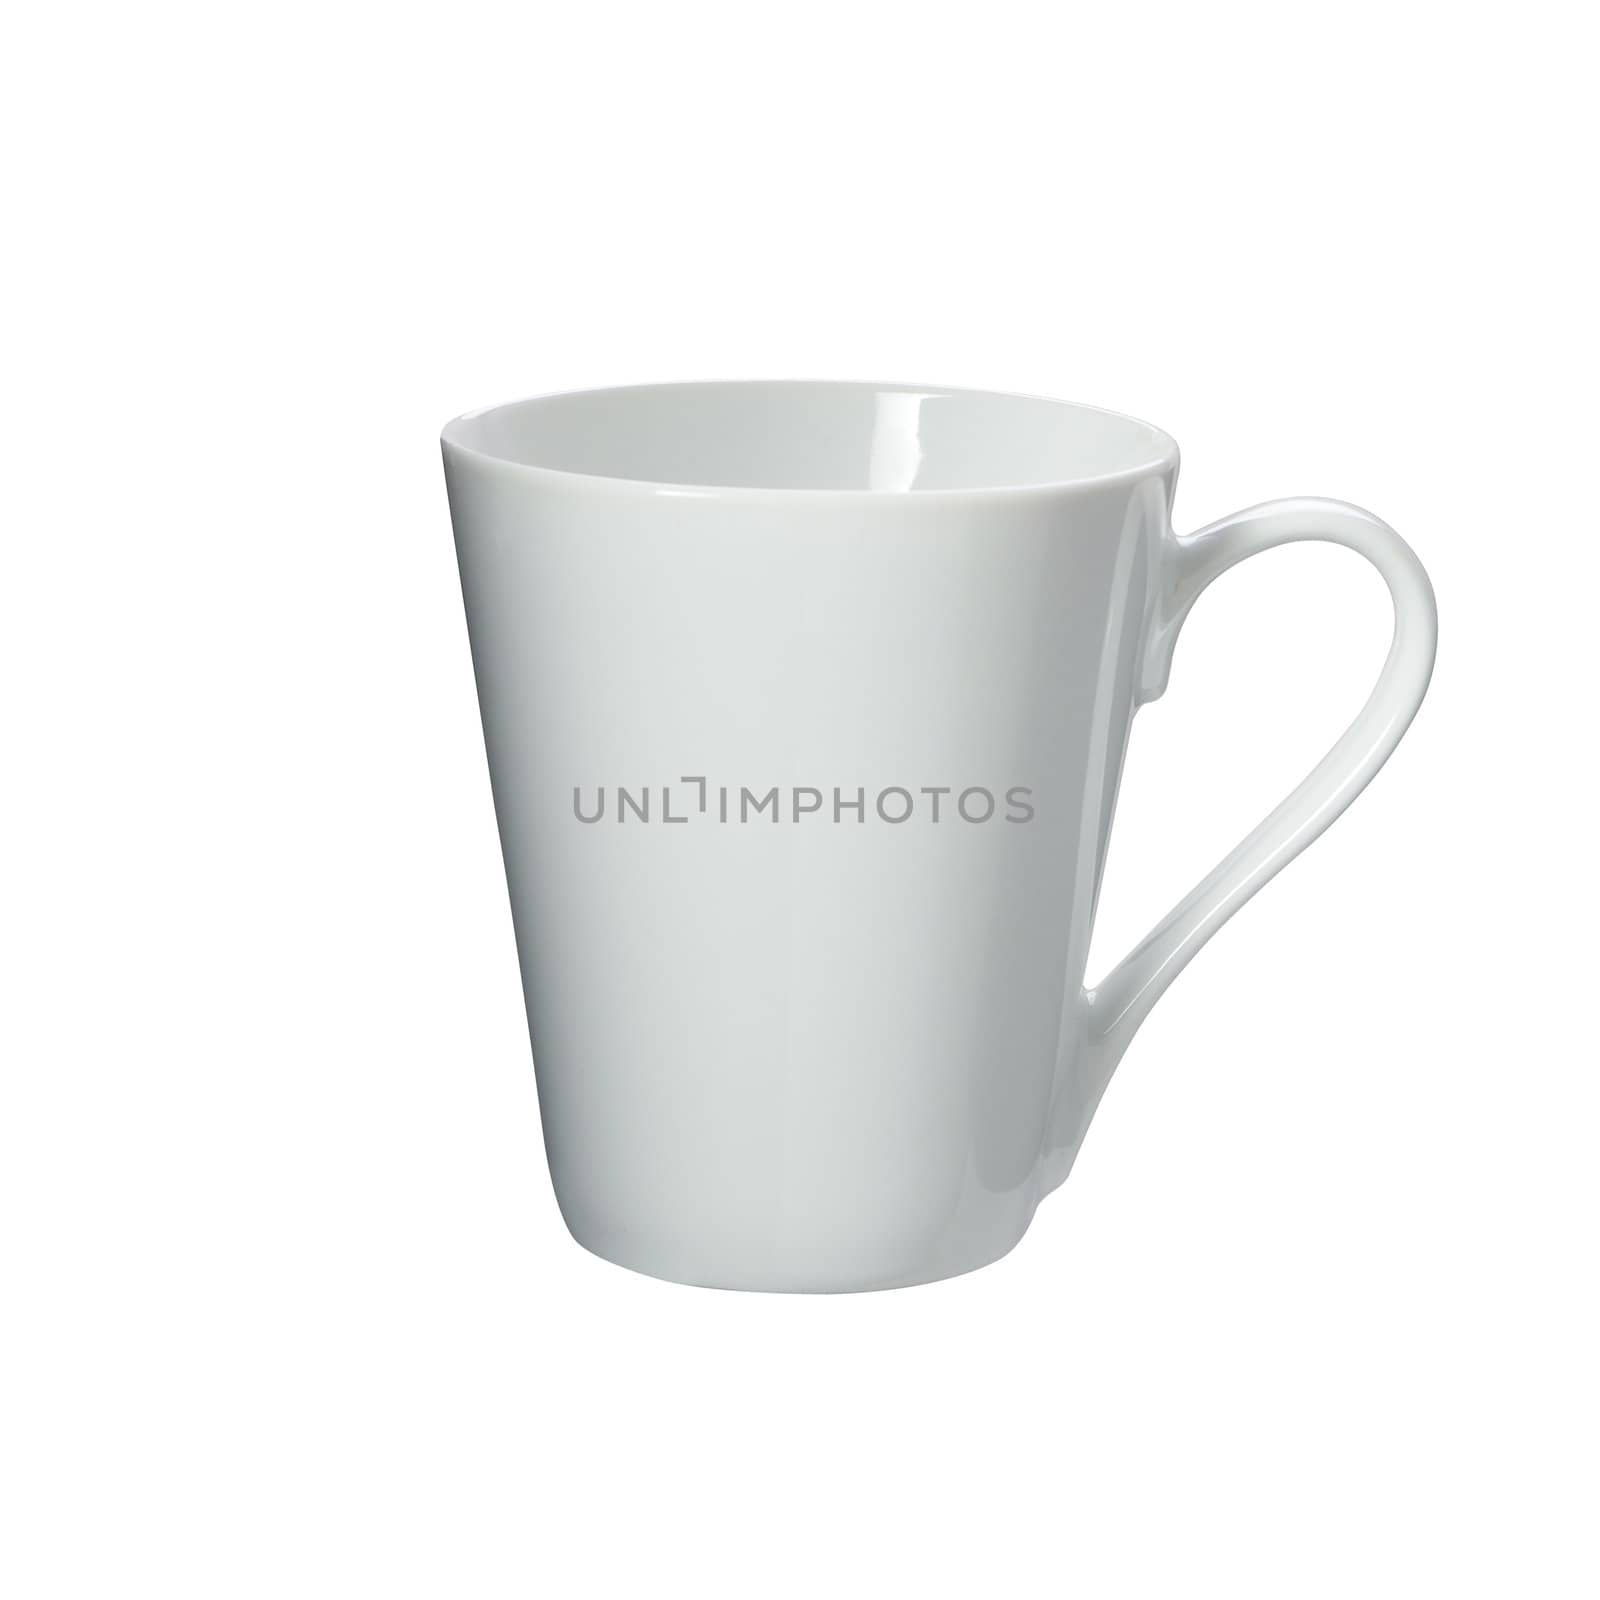 cup isolated on white background